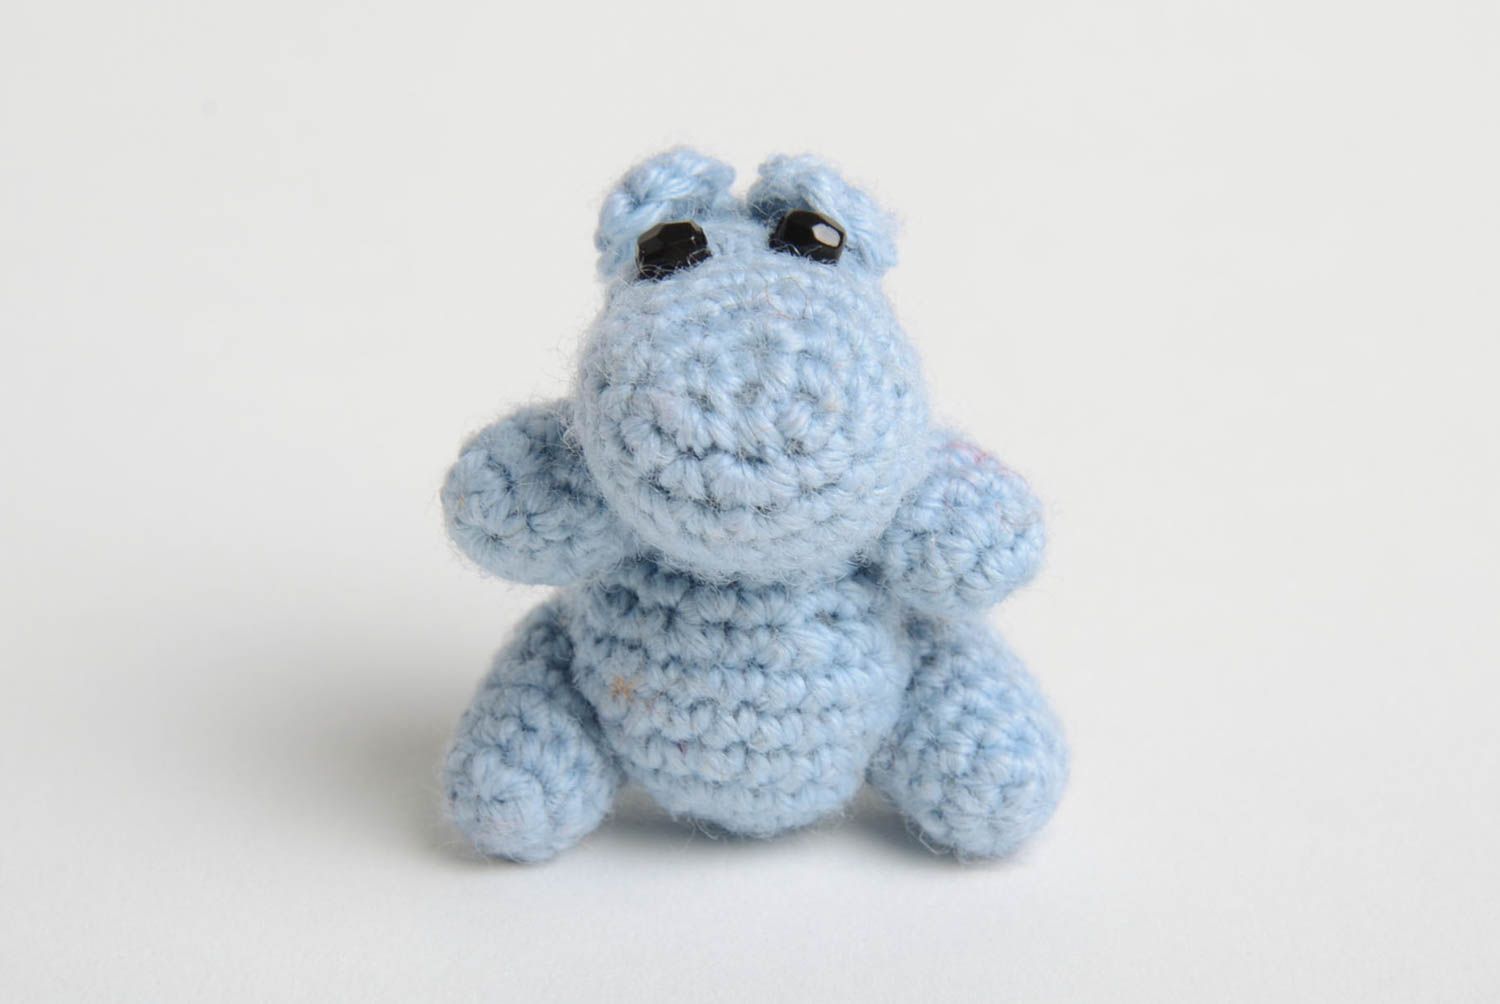 Handmade toy designer toy crocheted toy animal toy gift for baby decor ideas photo 2